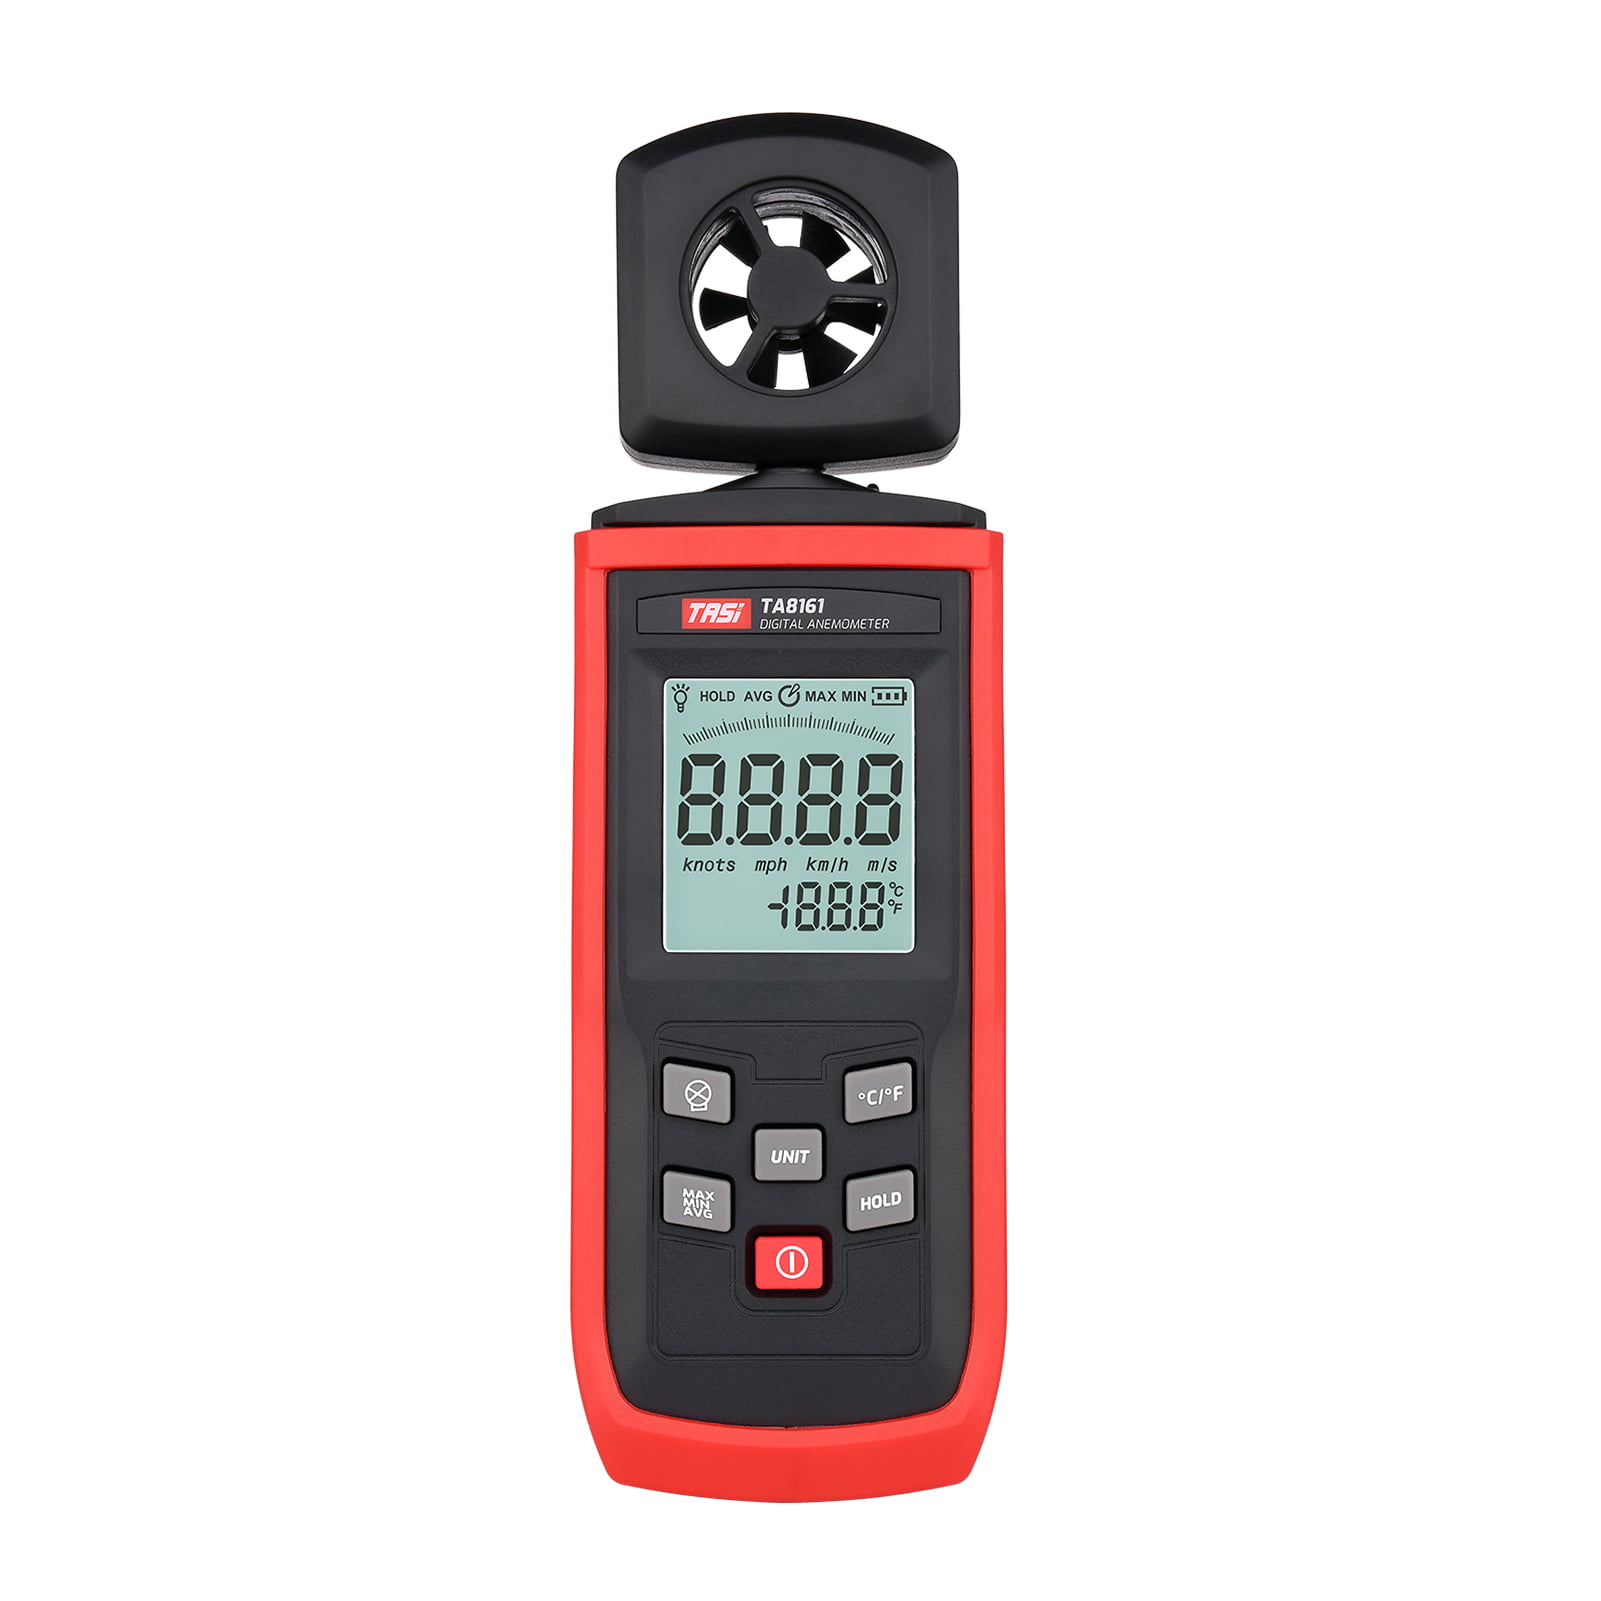 Temperature Hanchen TA8161 Digital Anemometer for Measuring Wind Speed Volume Hand-held High Precision Standard Integrated Wind Speed Tester with 500 Groups Data USB Transmission 